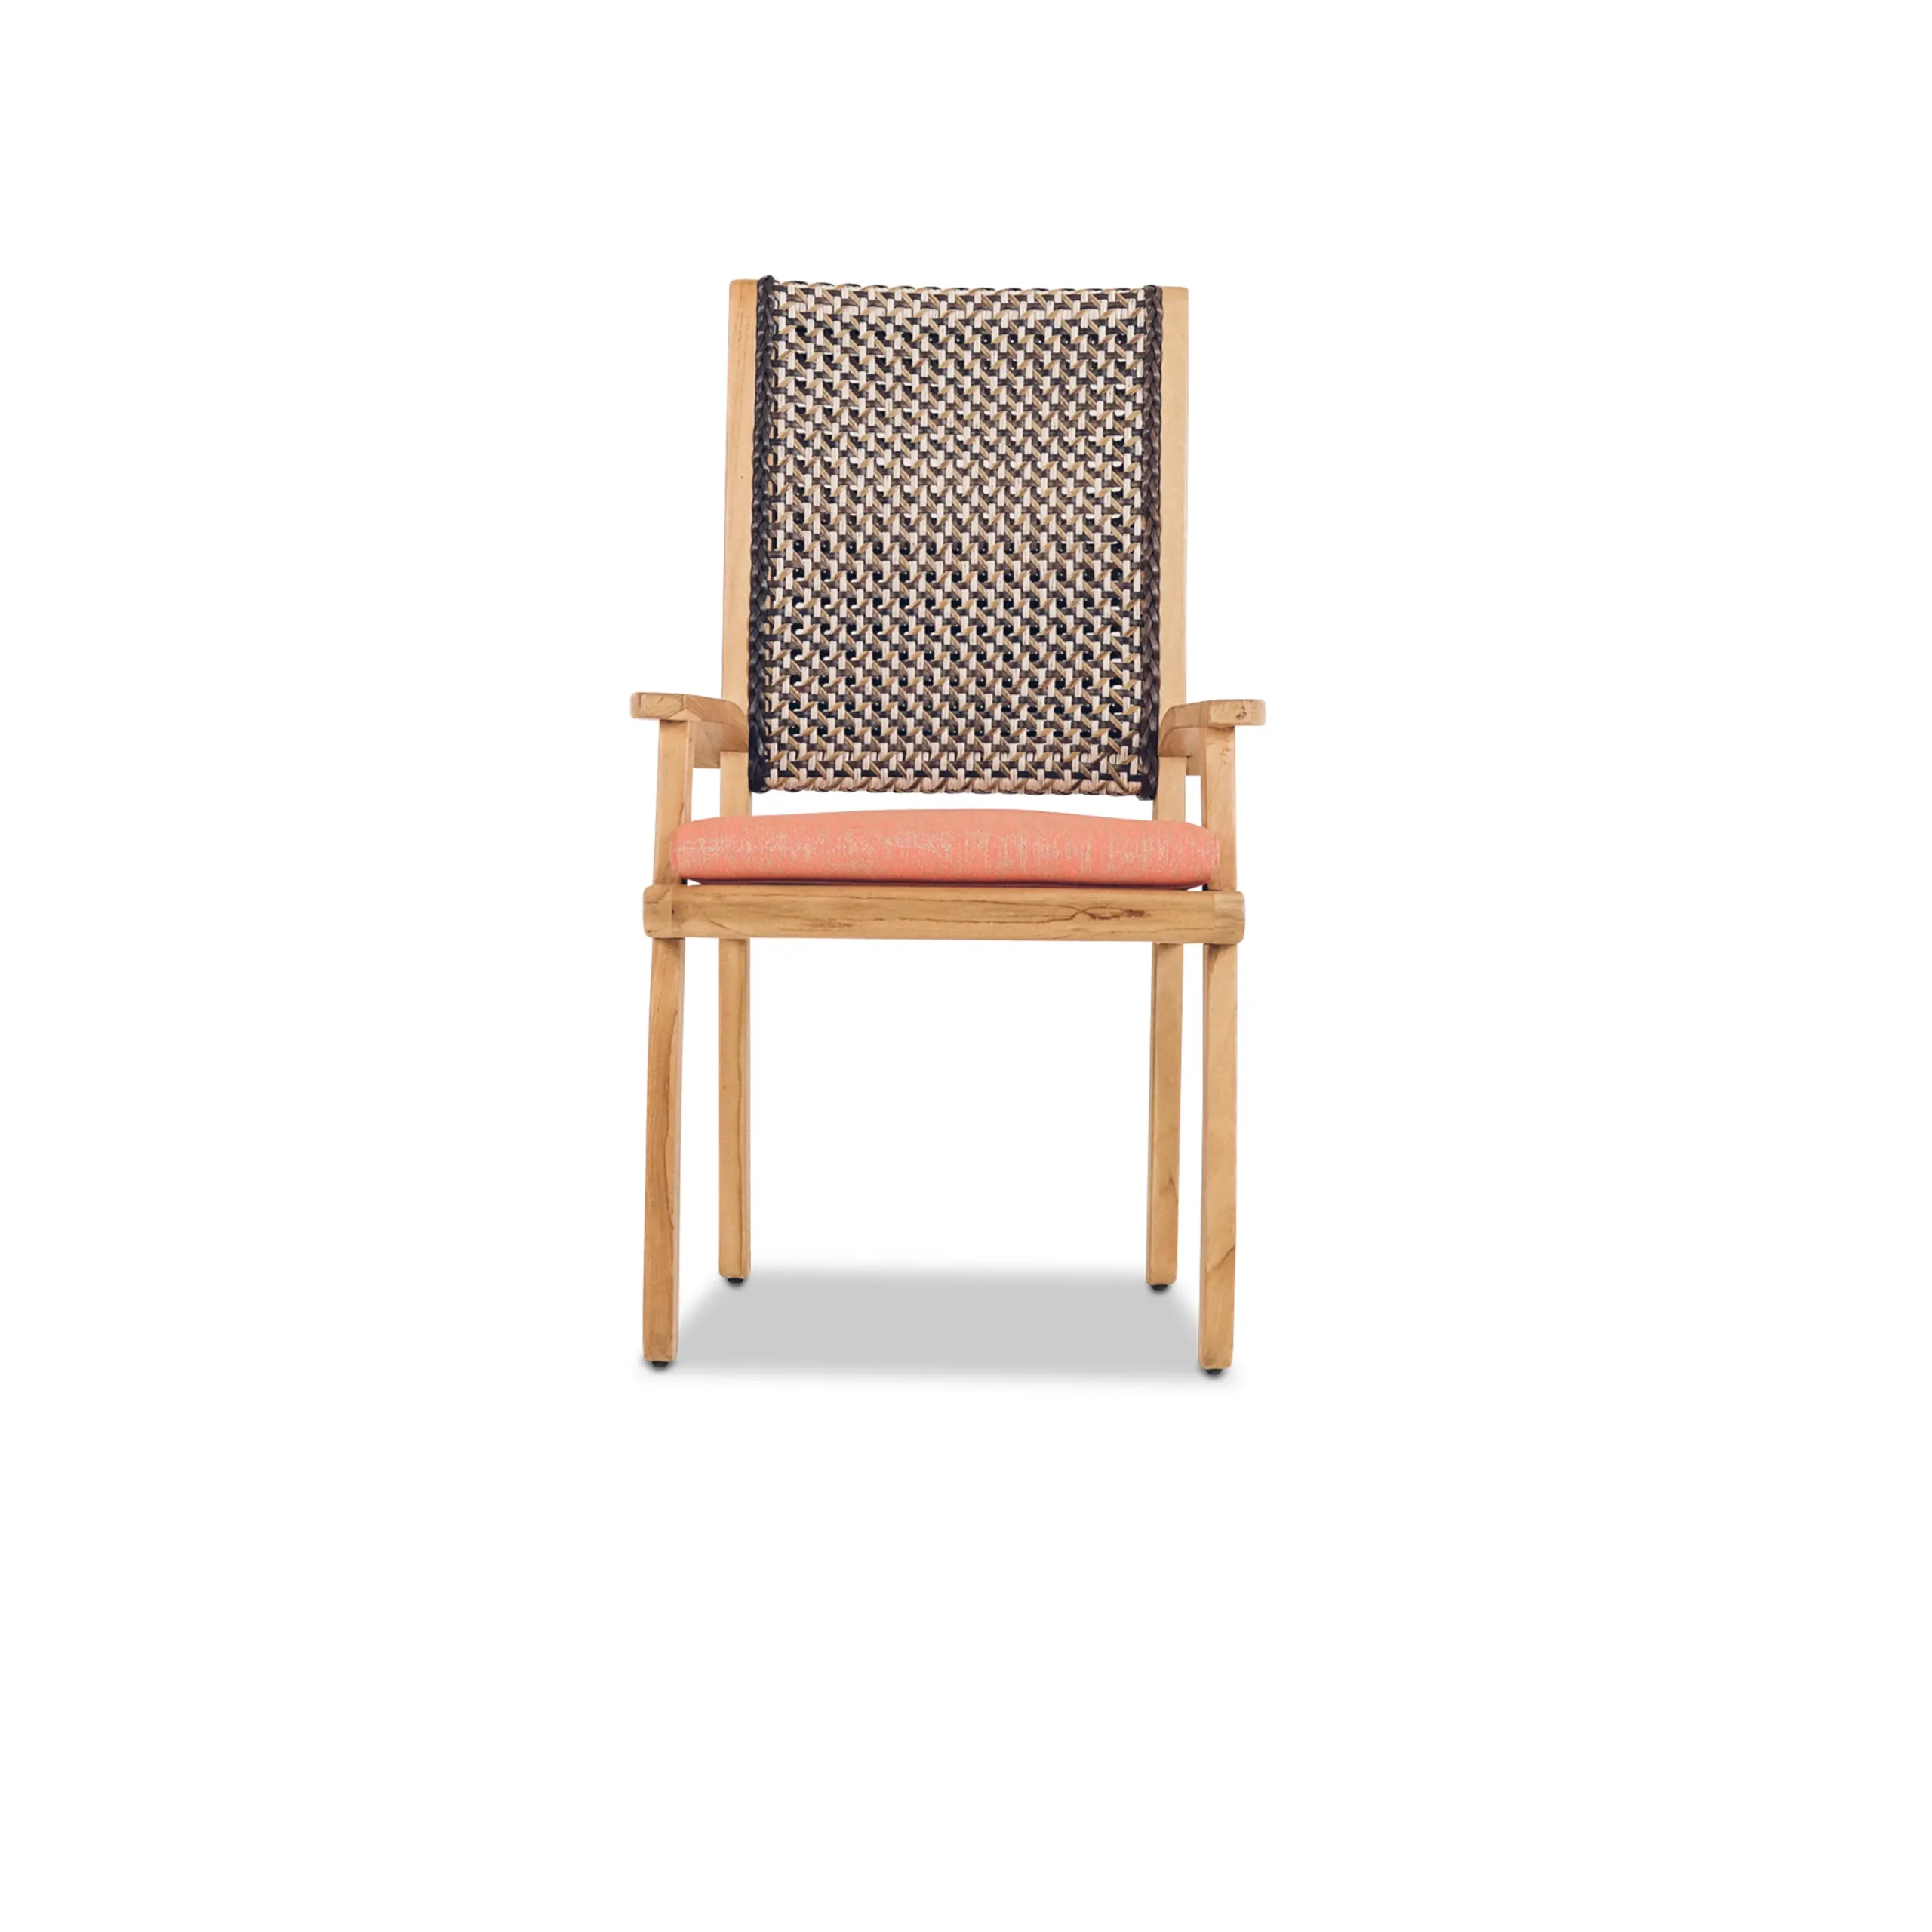 Dining_chair-Borneo-front1_w